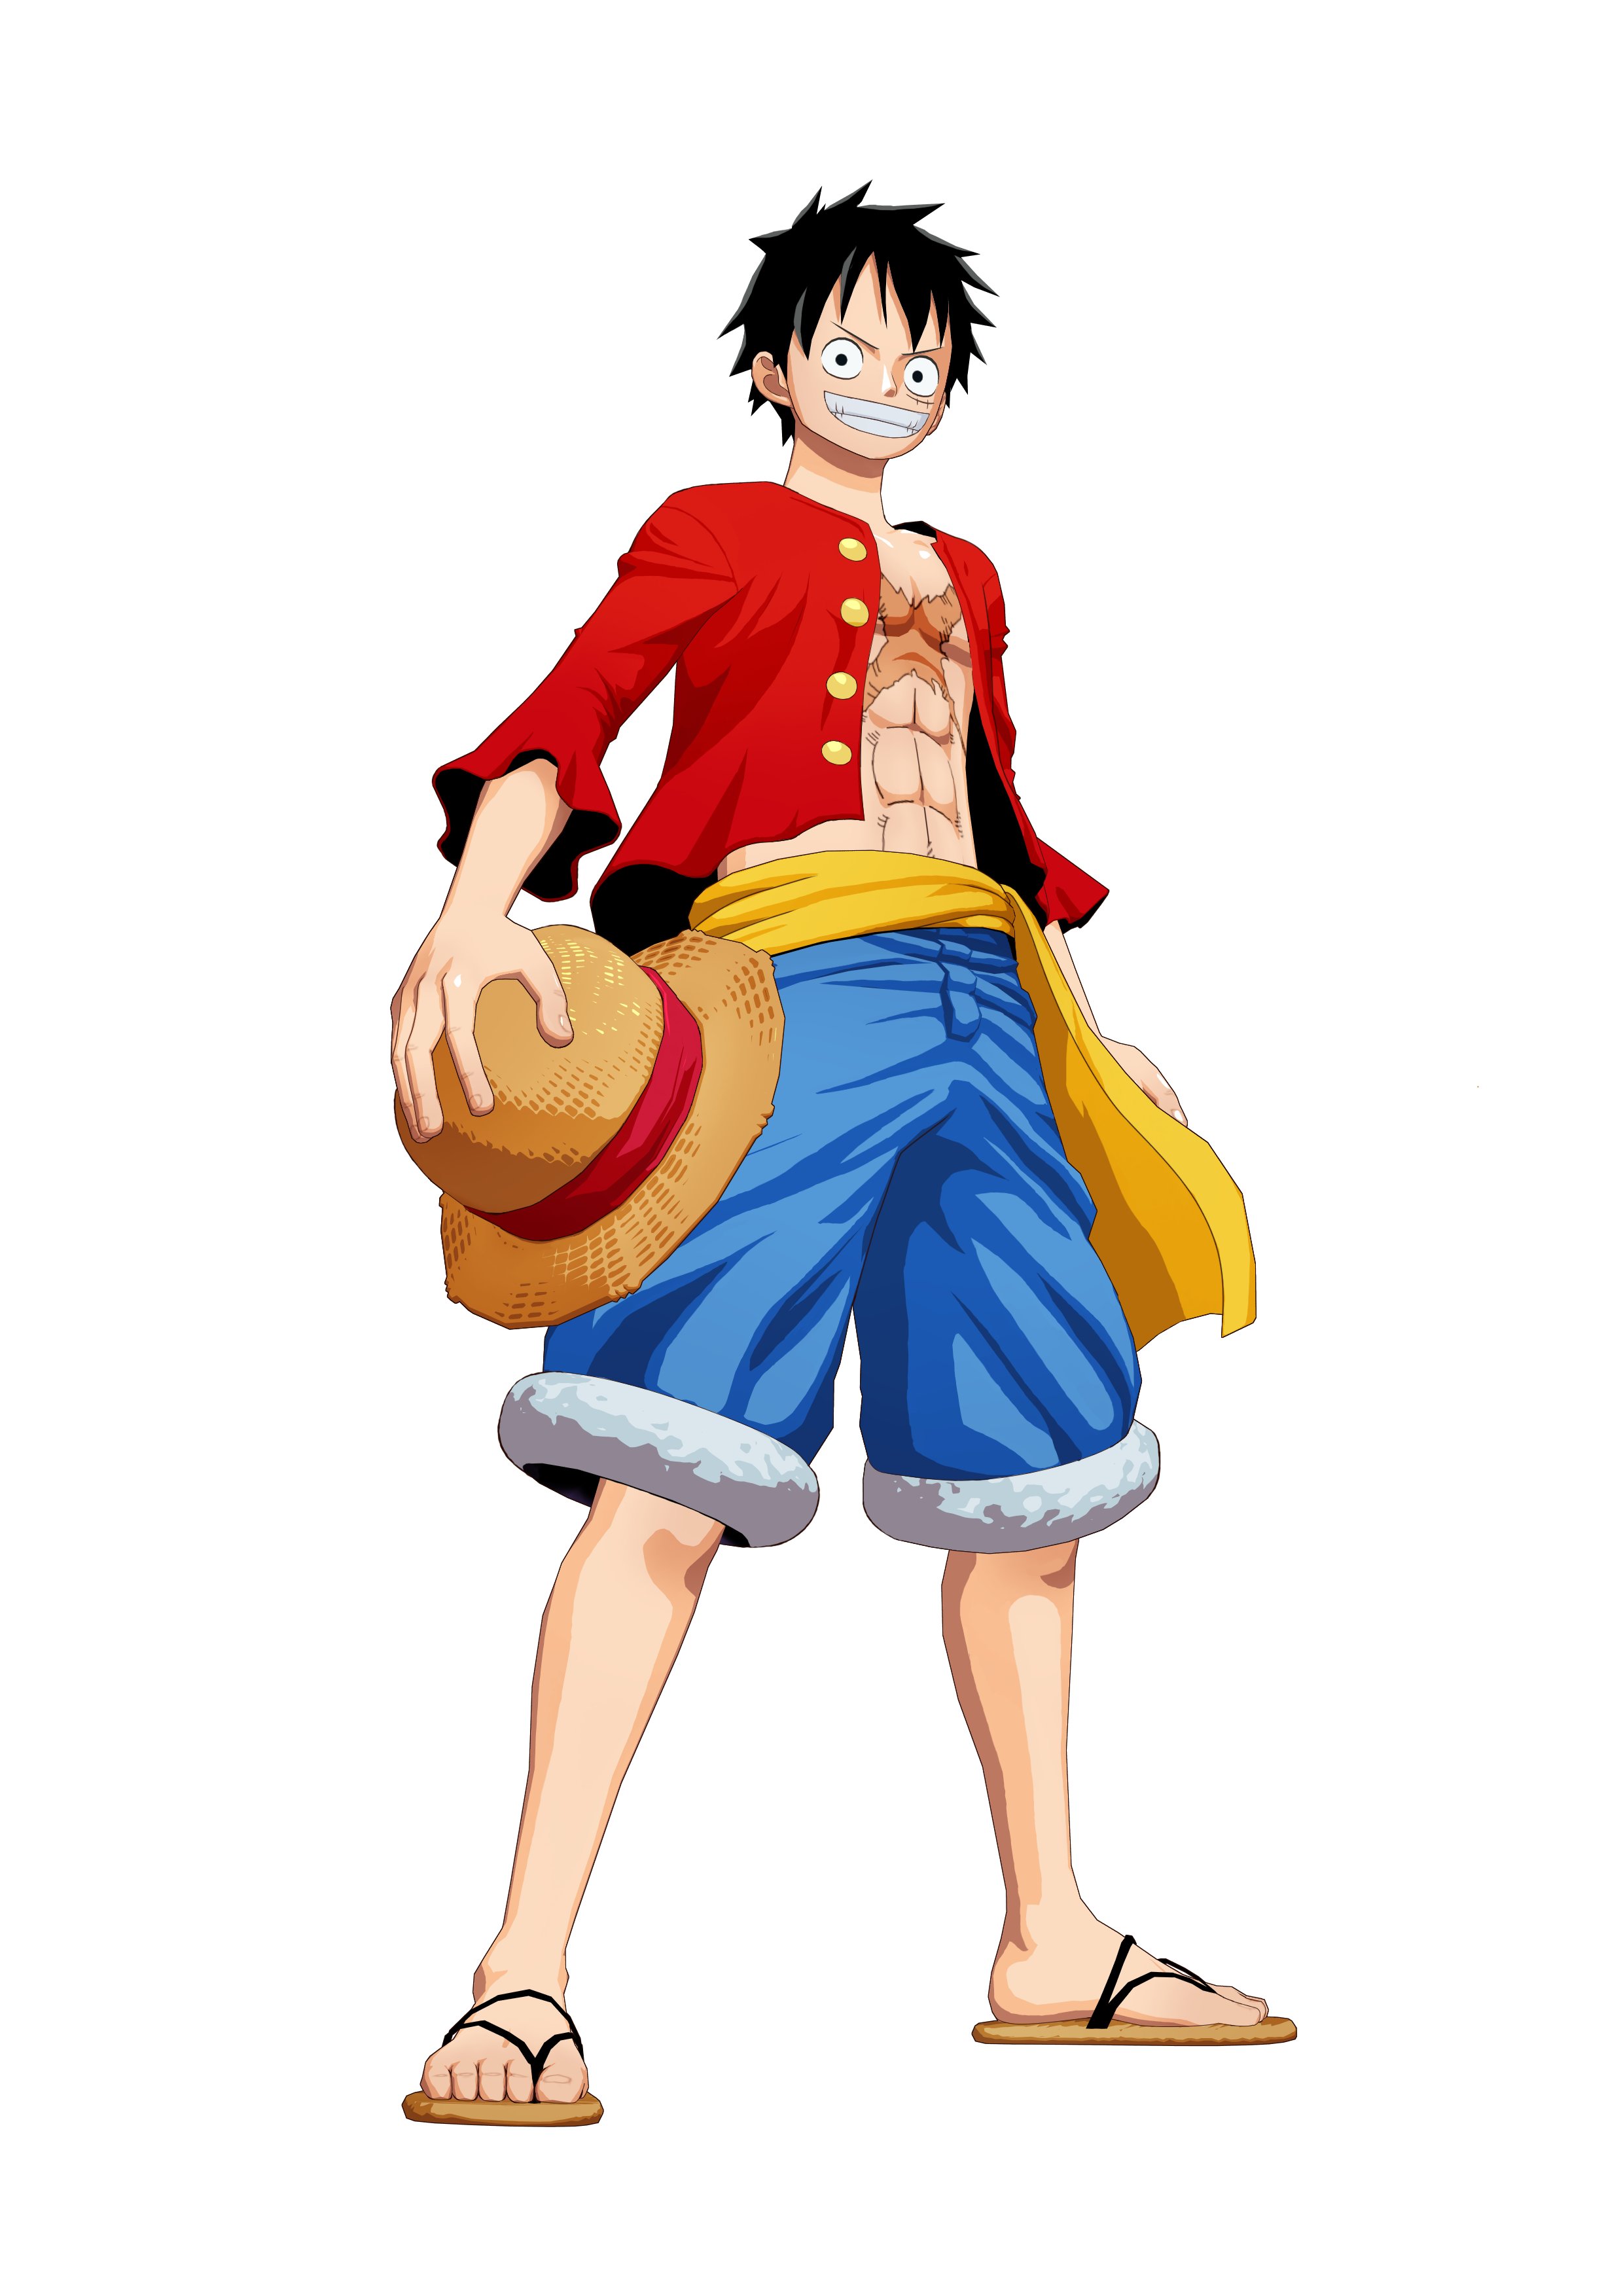 One Piece: Unlimited World Red Game Also Headed to N. America - News ...